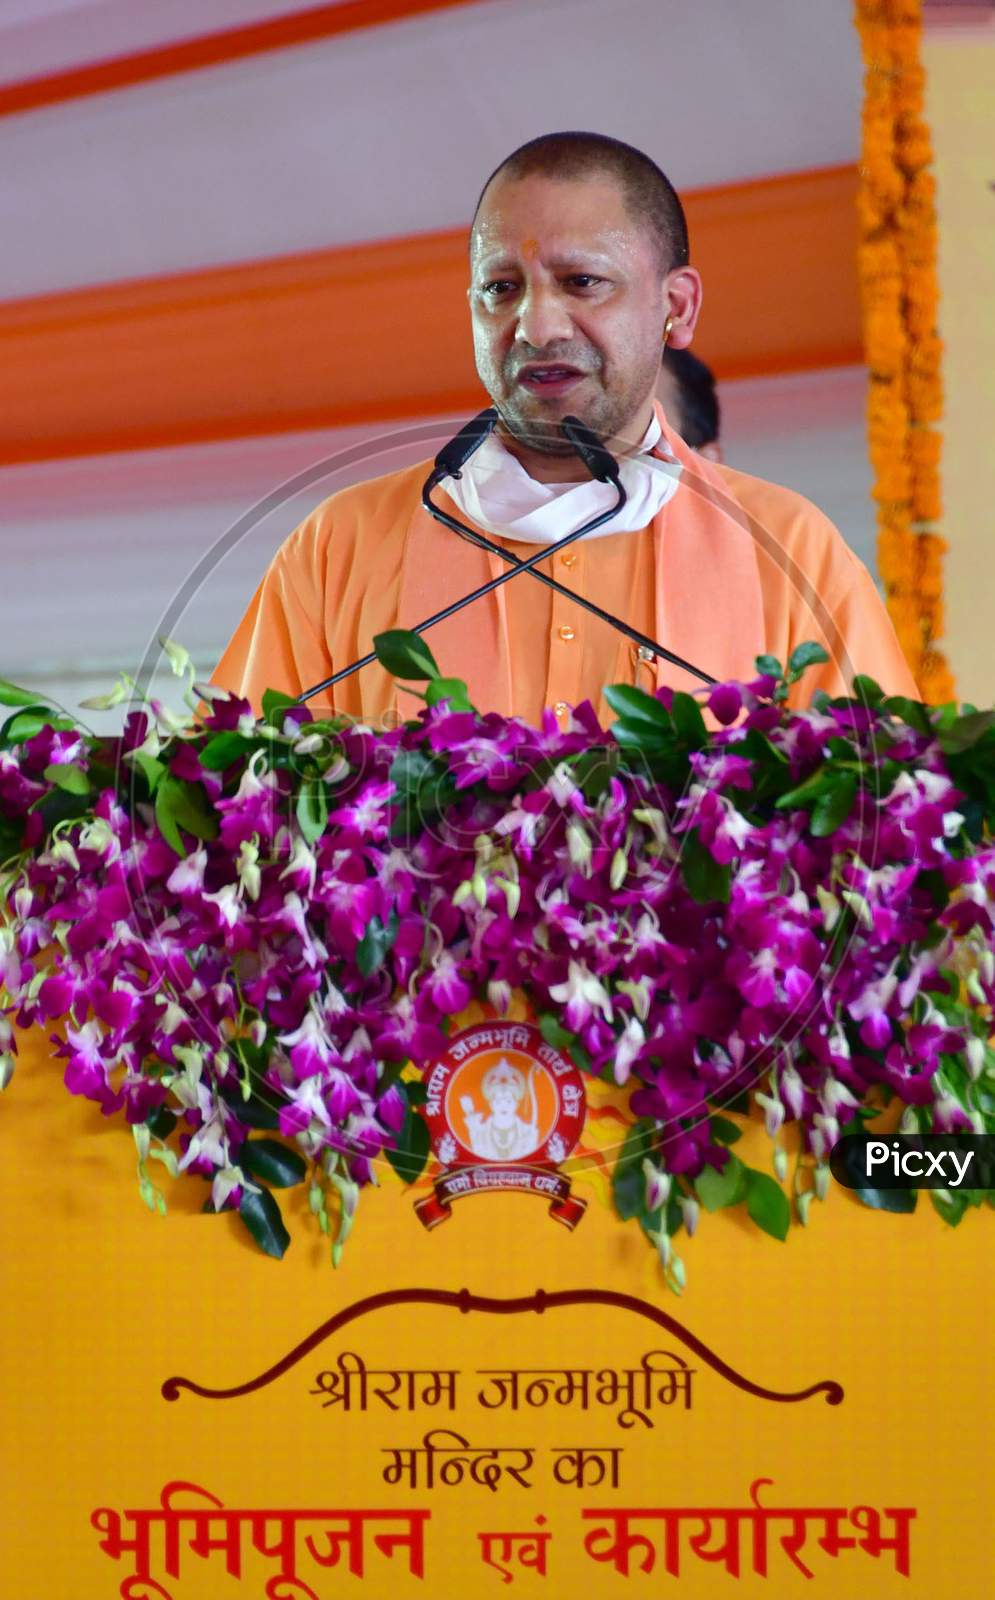 Uttar Pradesh Chief Minister Yogi Adityanath addresses people after the foundation laying ceremony for the Hindu Lord Ram's temple, in Ayodhya, India, August 5, 2020.